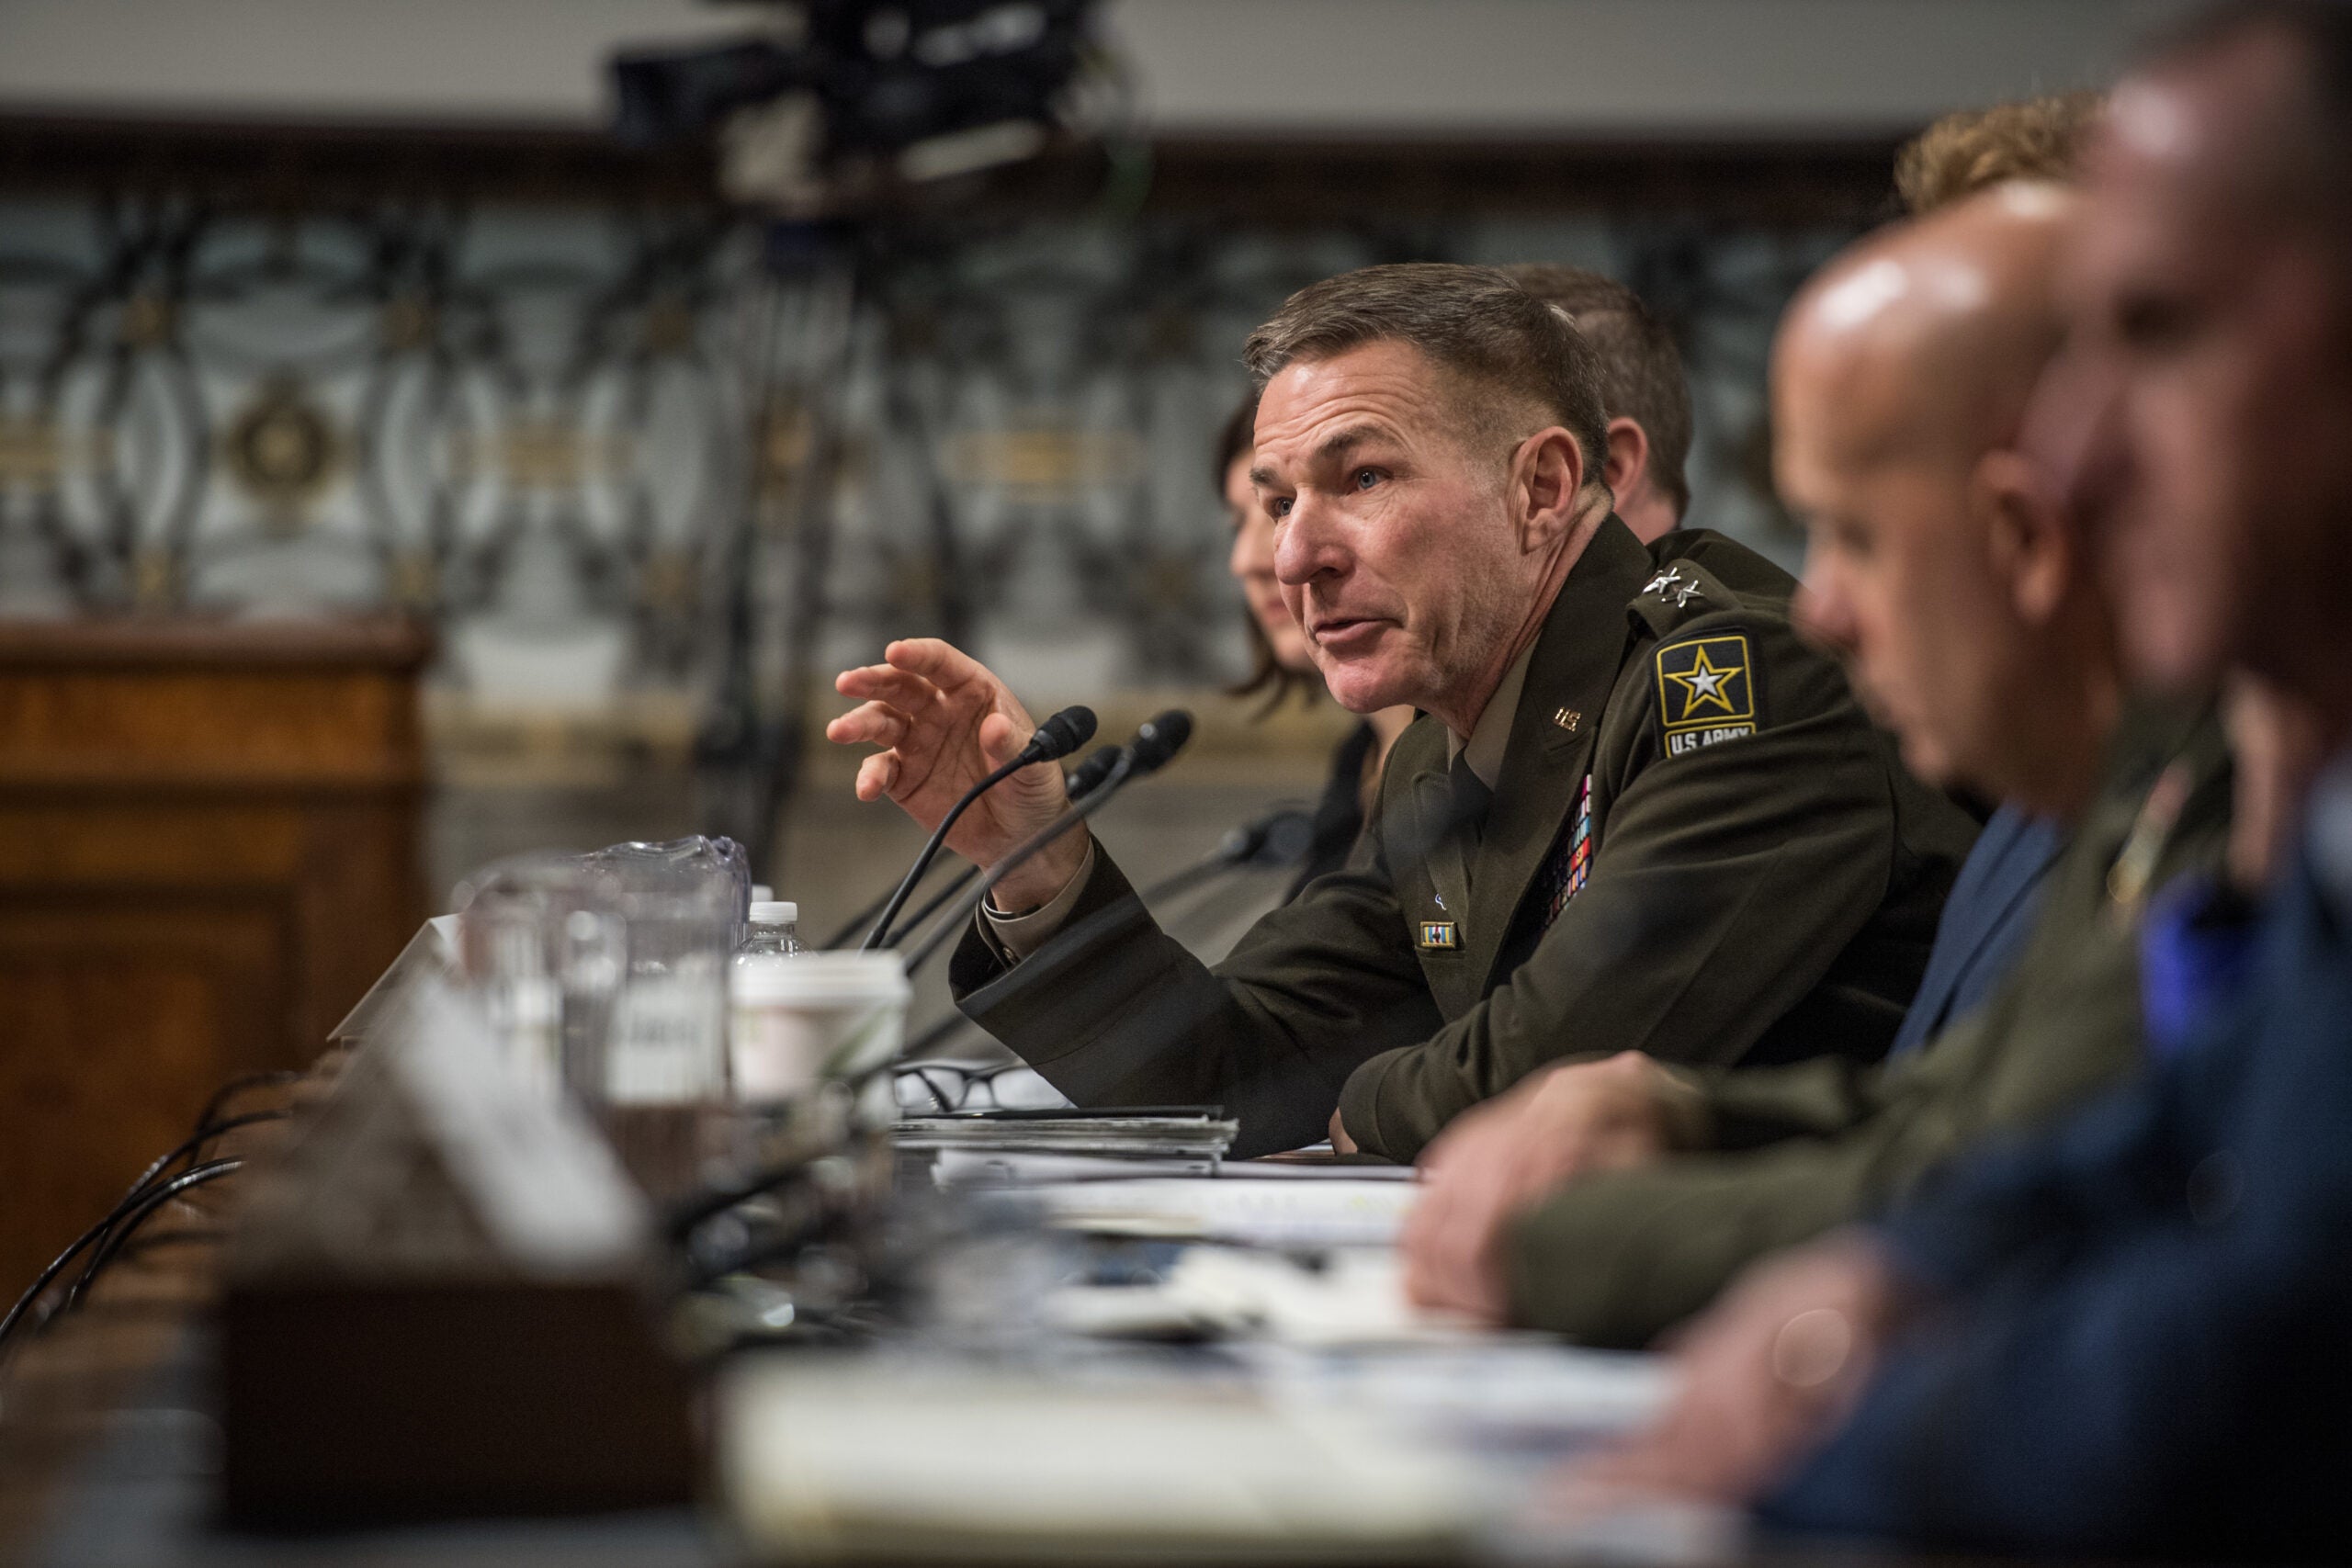 Gen. James C. McConville, along with other service Secretaries and Chiefs, speaks to the Senate Committee on Armed Services during a hearing on privatized housing in Washington D.C., Dec. 3, 2019. (U.S. Army photo by Sgt. Dana Clarke)